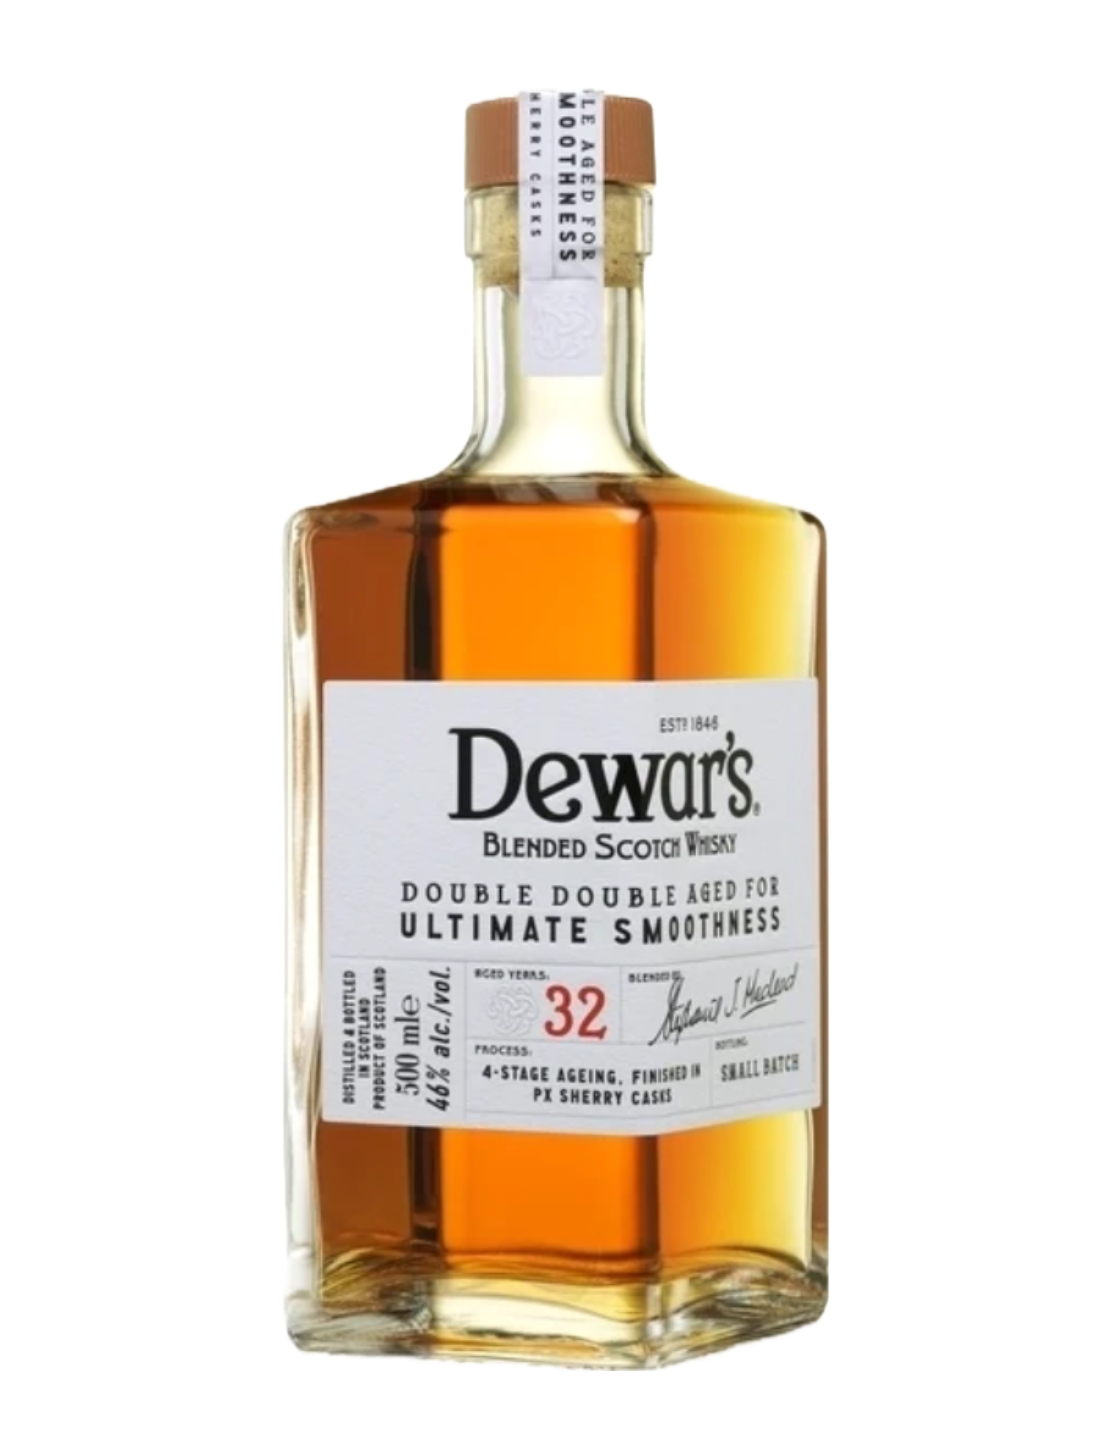 An elegant bottle of Dewar's Double Double 32 Year Old Blended Scotch in front of a plain white background